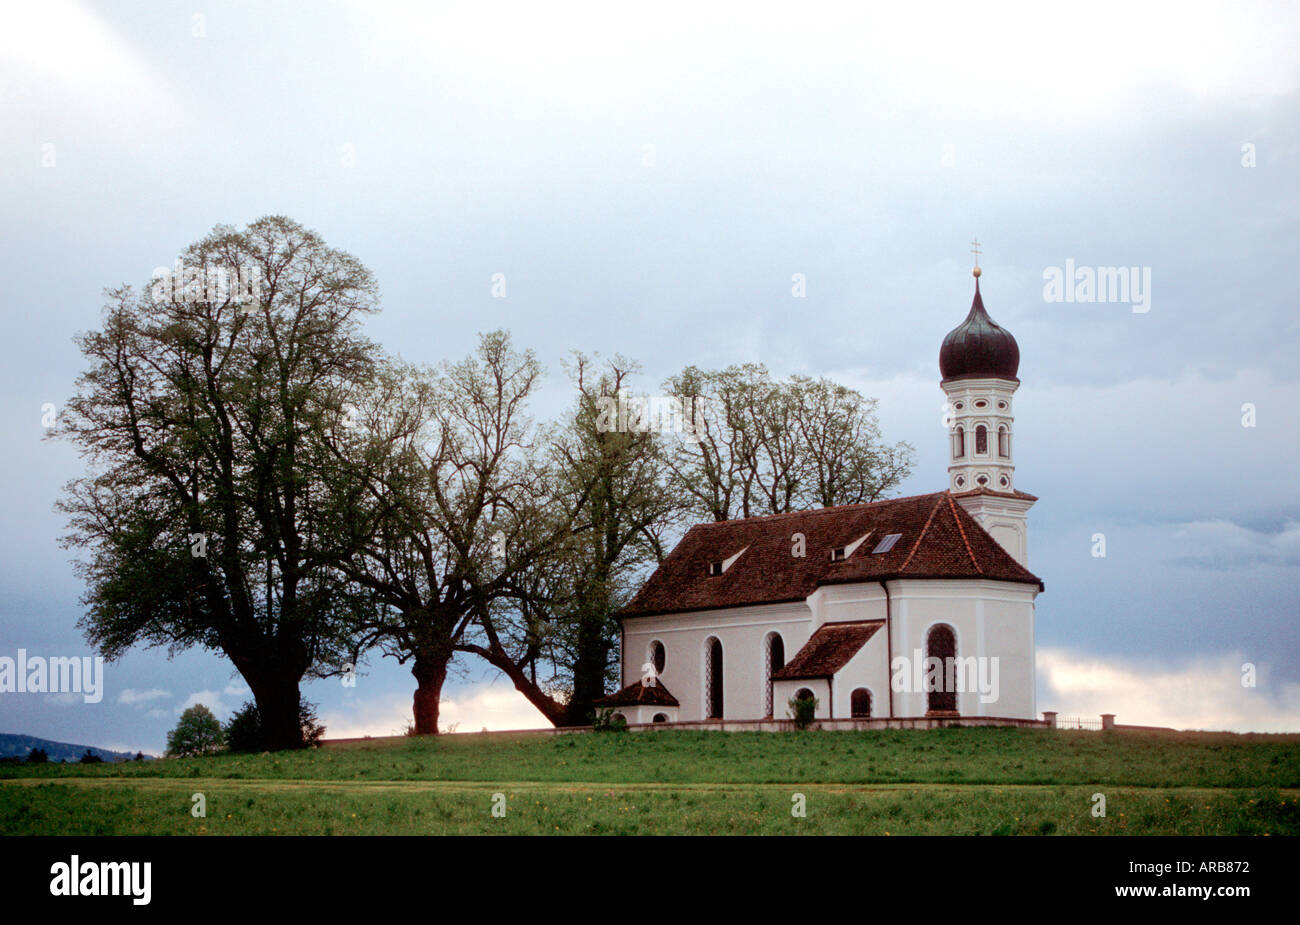 St Andrae a typical Bavarian church standing solitaire at Etting near Polling  Weilheim-Schongau district  Bavaria Germany Stock Photo